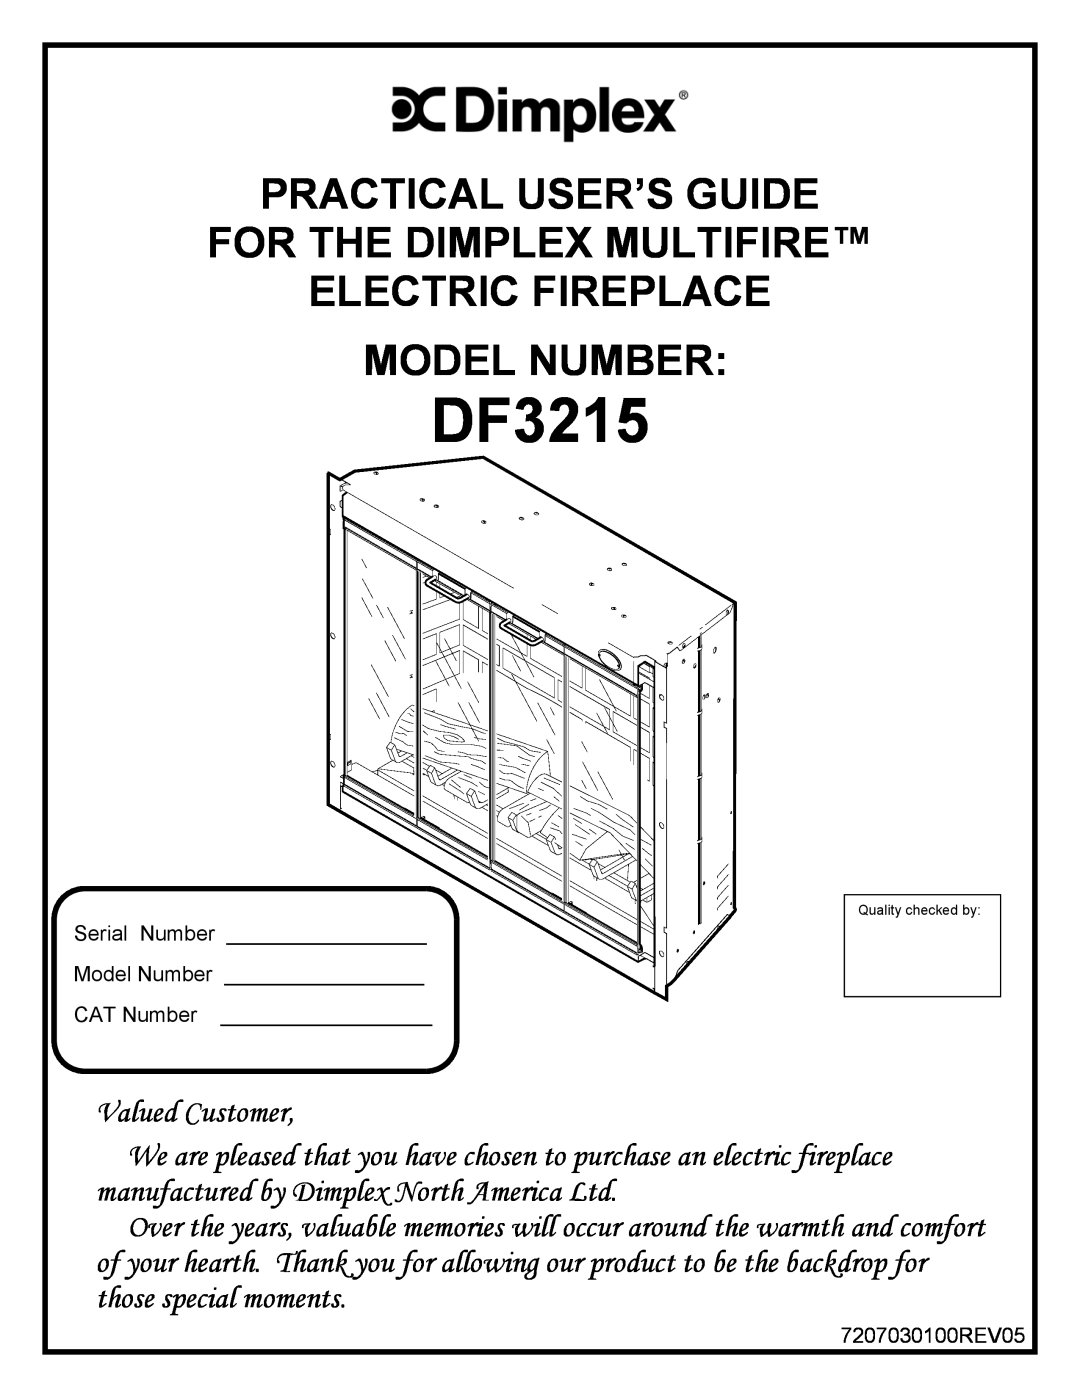 Dimplex DF3215 manual Practical User’S Guide For The Dimplex Multifire, Electric Fireplace Model Number 